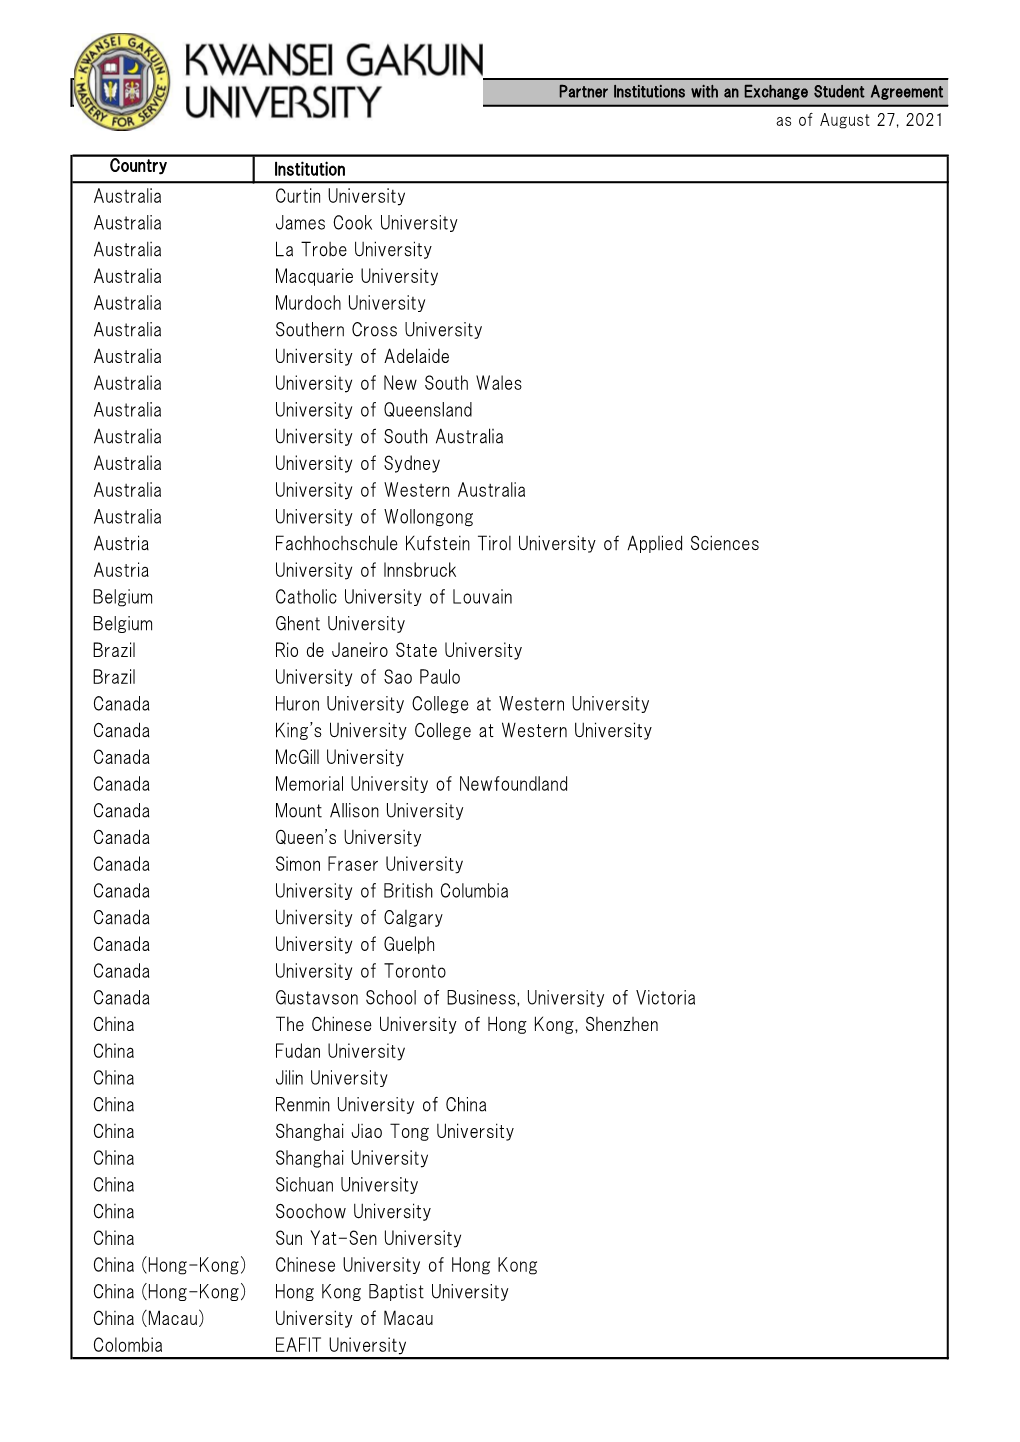 Partner Institutions with an Exchange Student Agreement As of August 27, 2021